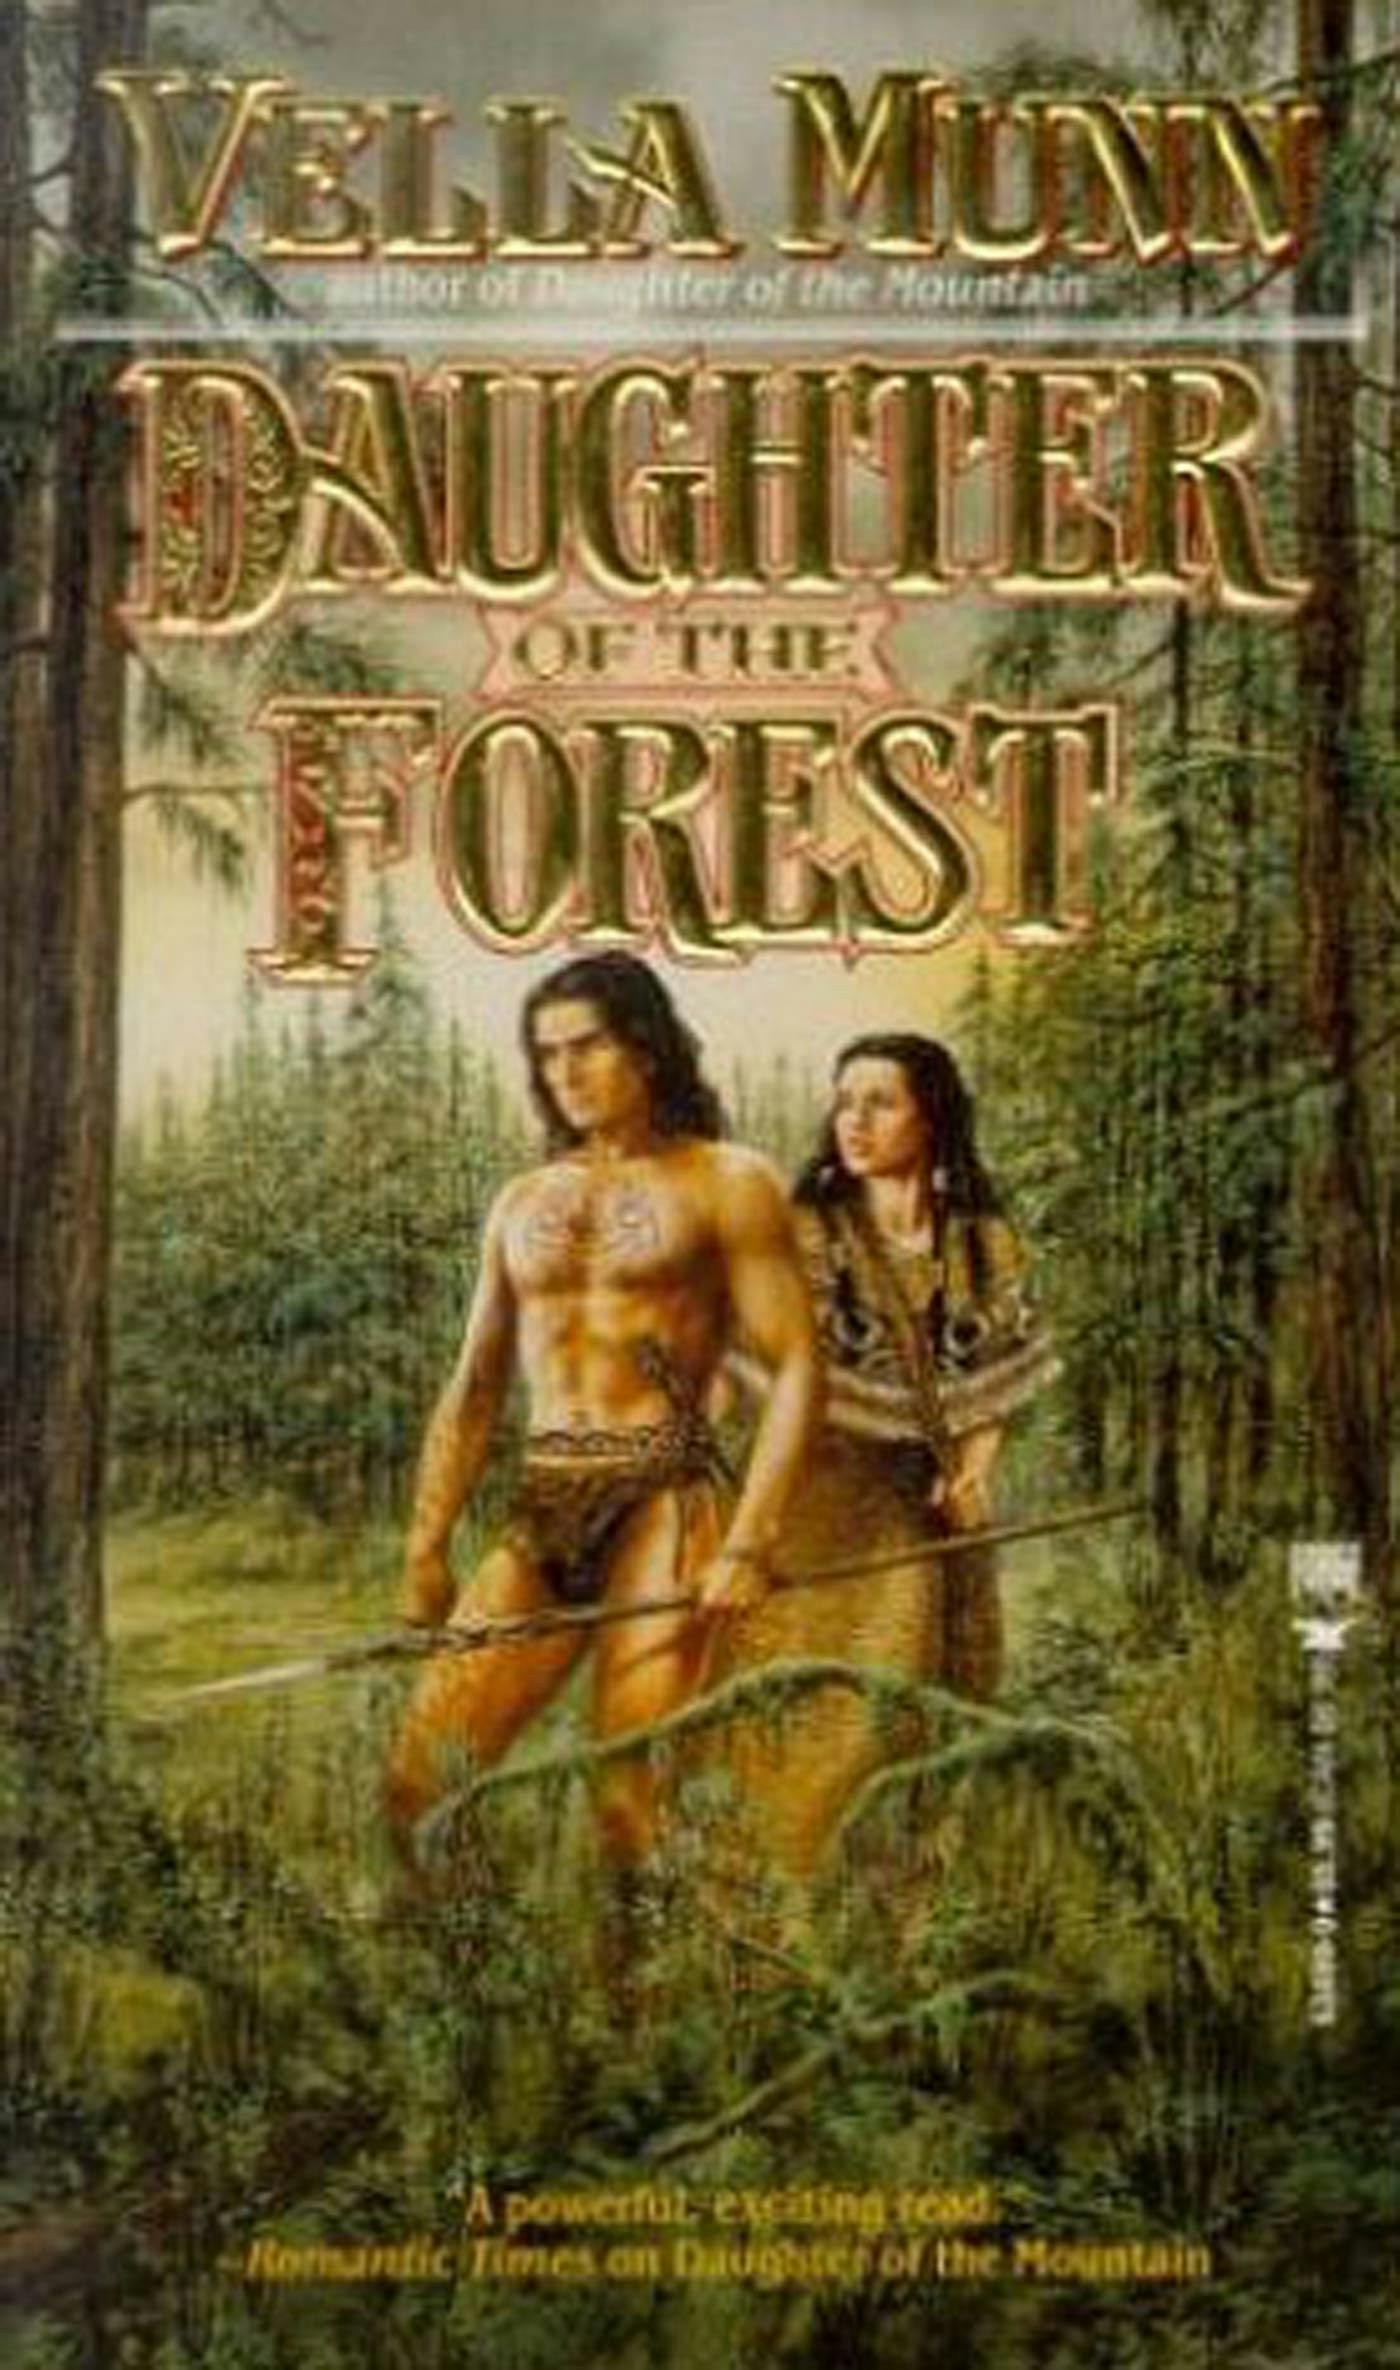 Cover for the book titled as: Daughter of the Forest